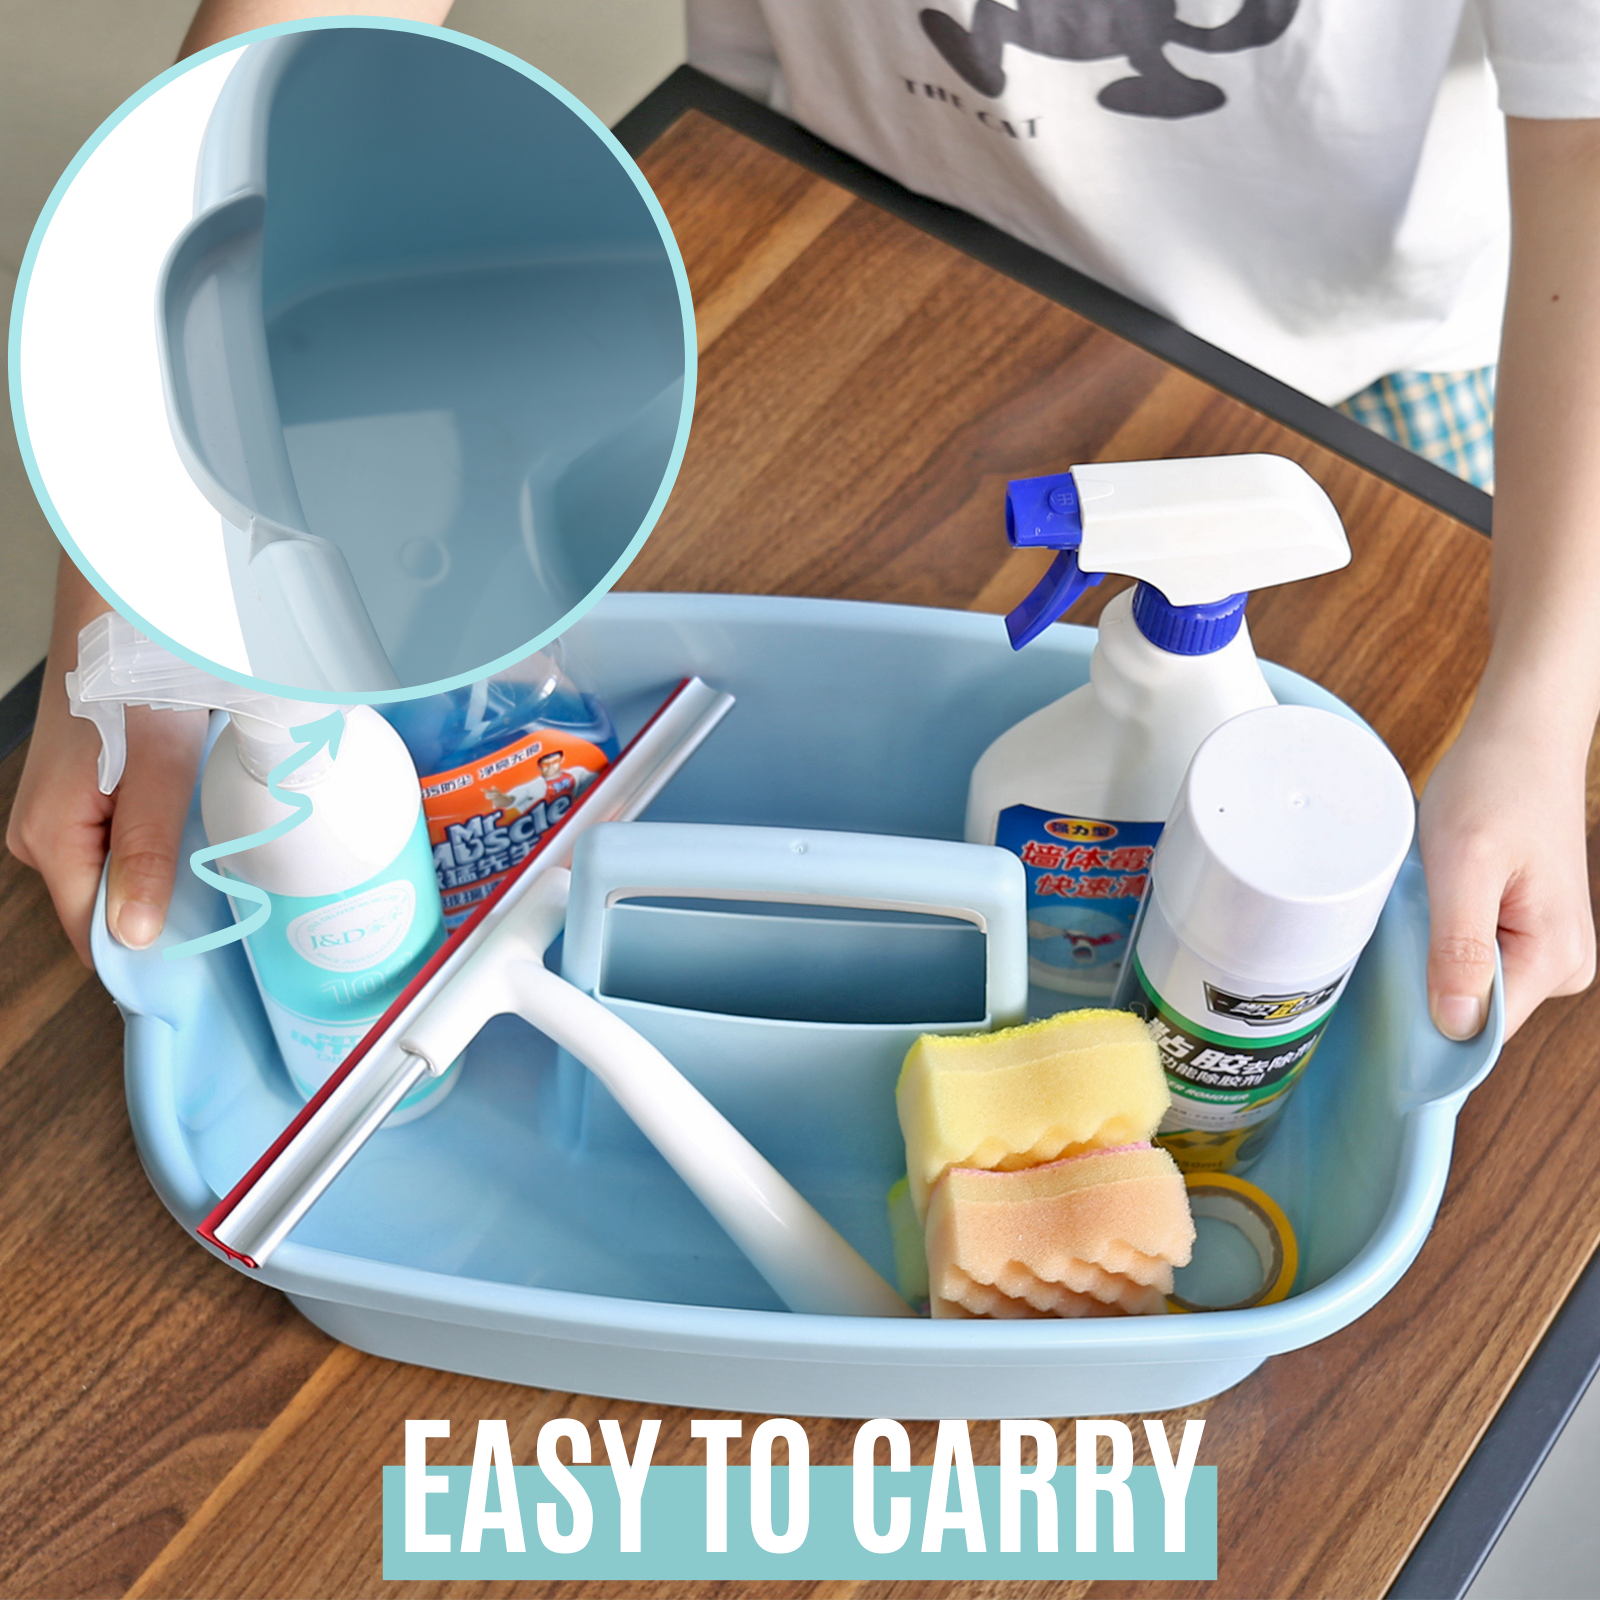 BISupply 4 Pack Portable Cleaning Supplies Caddy Organizer with